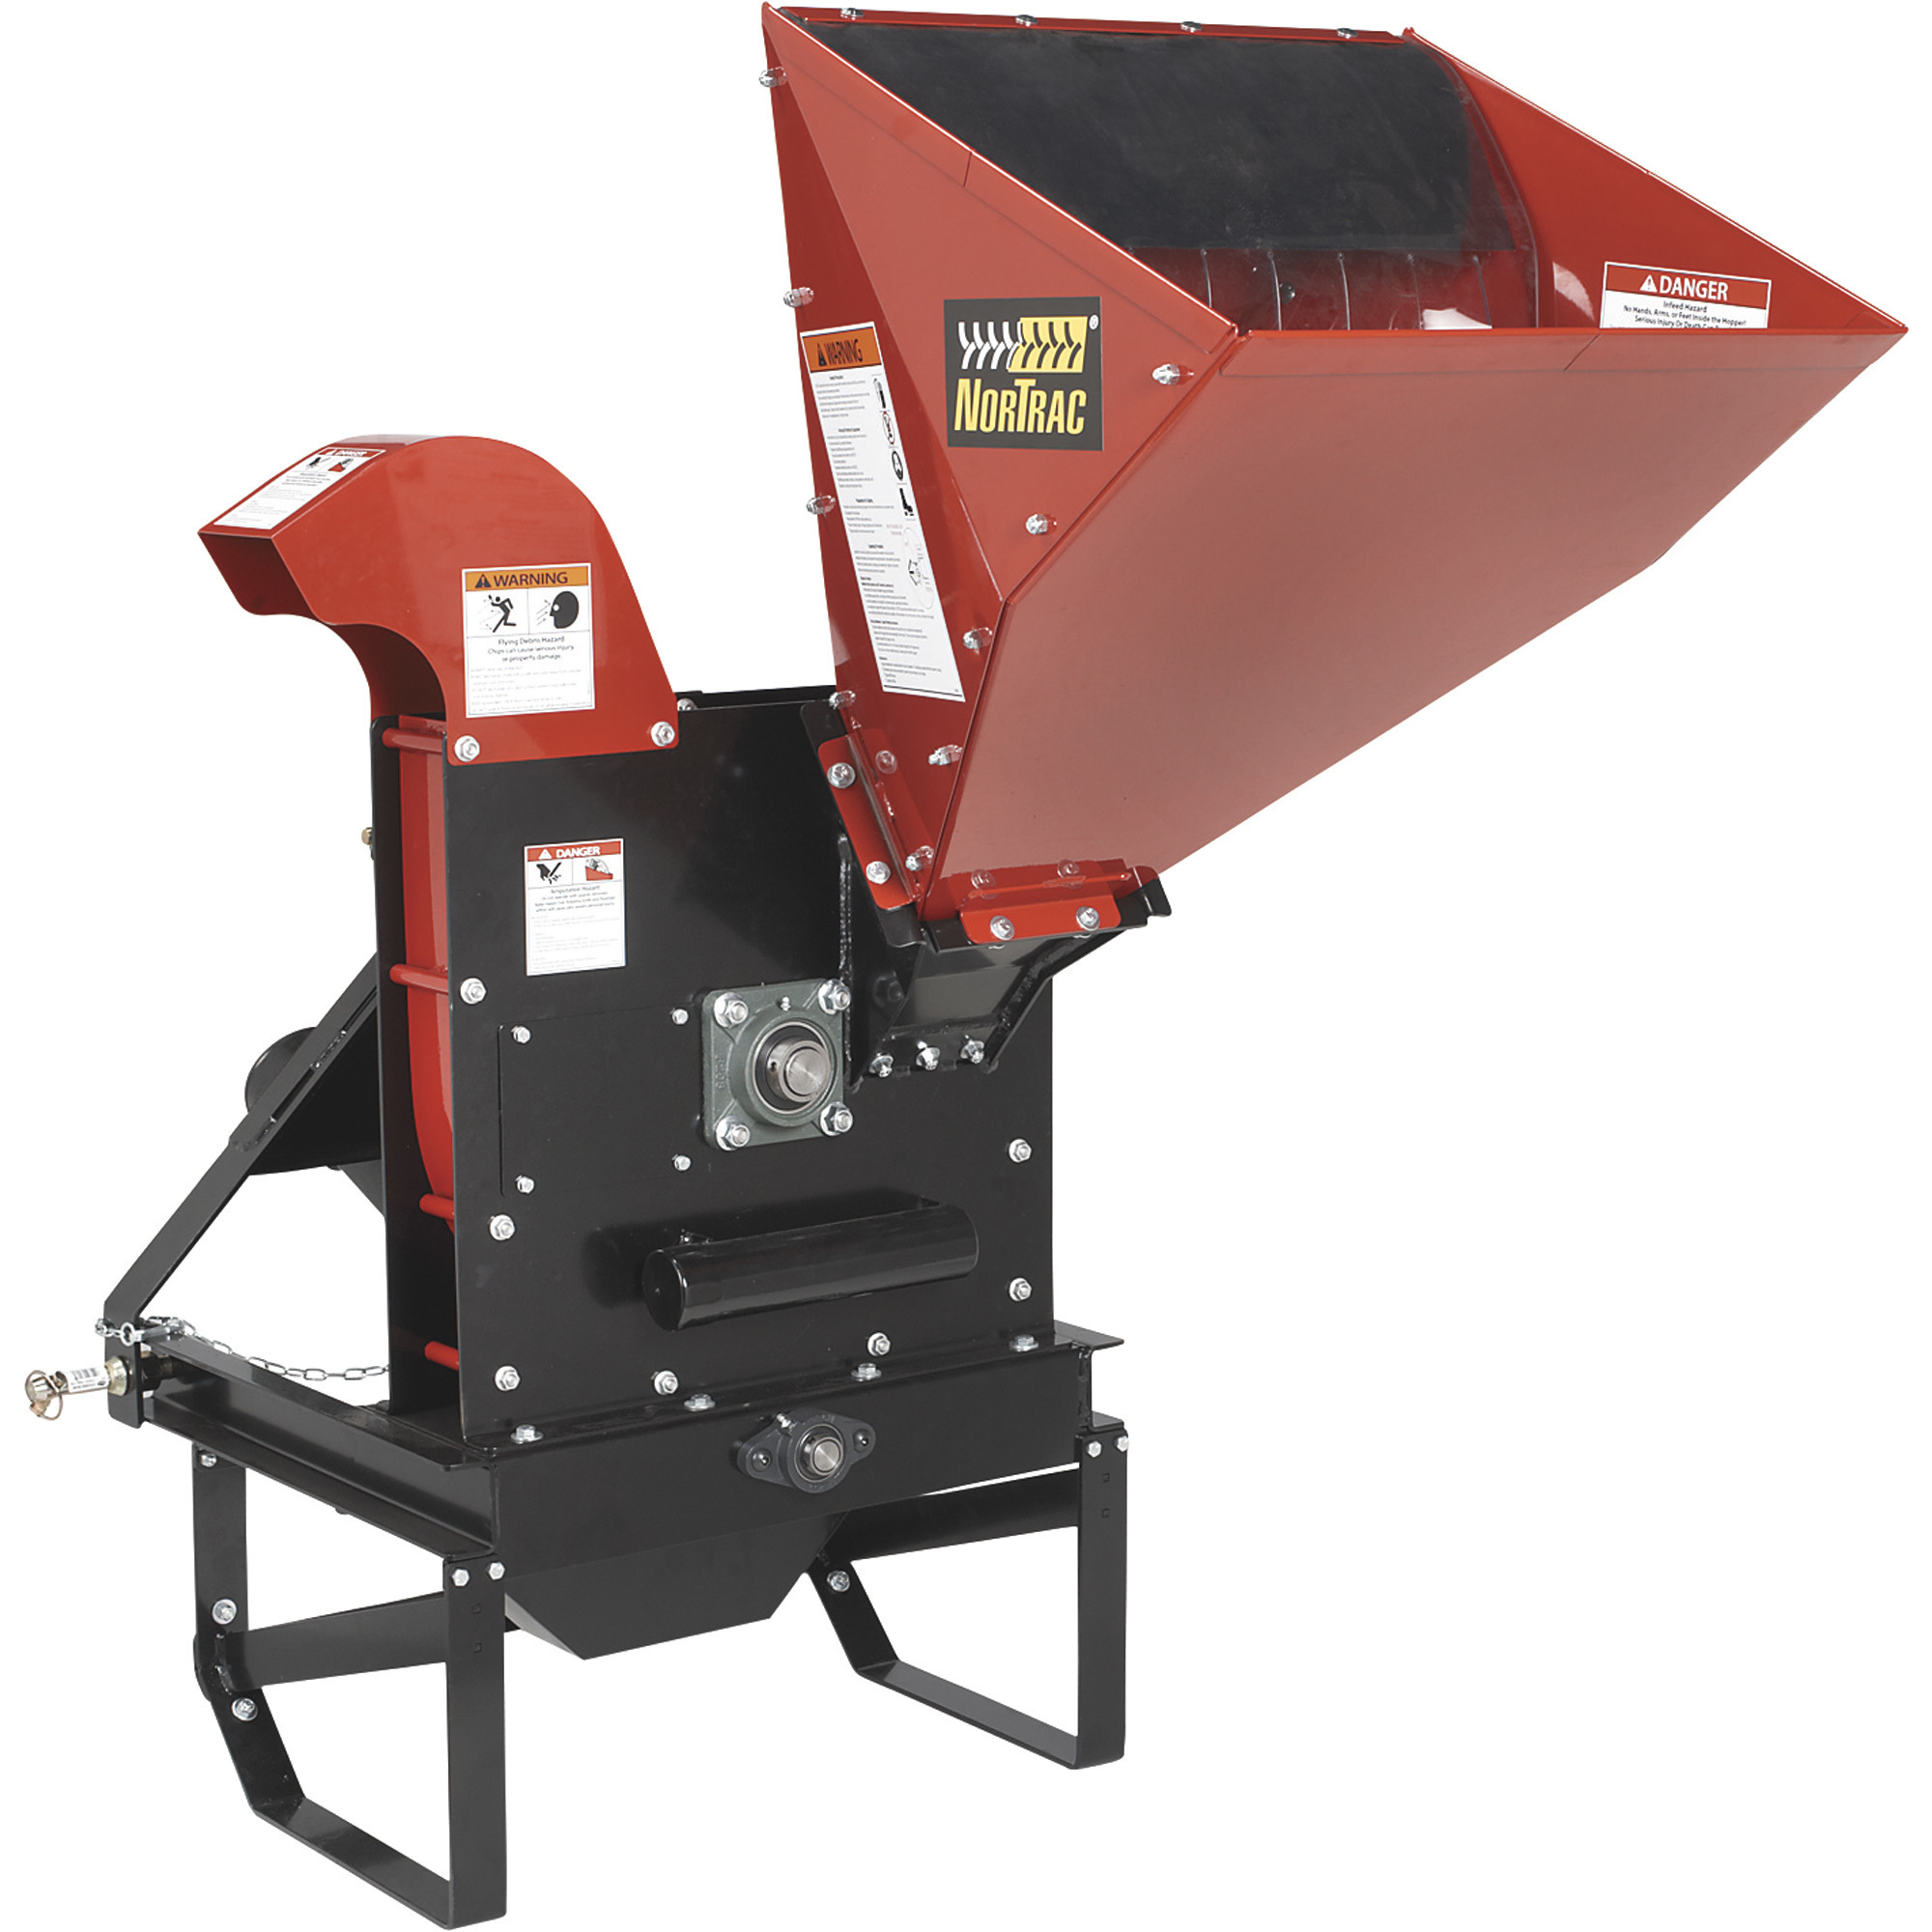 NorTrac PTO Wood Chipper, 5 1/2Inch Chipping Capacity